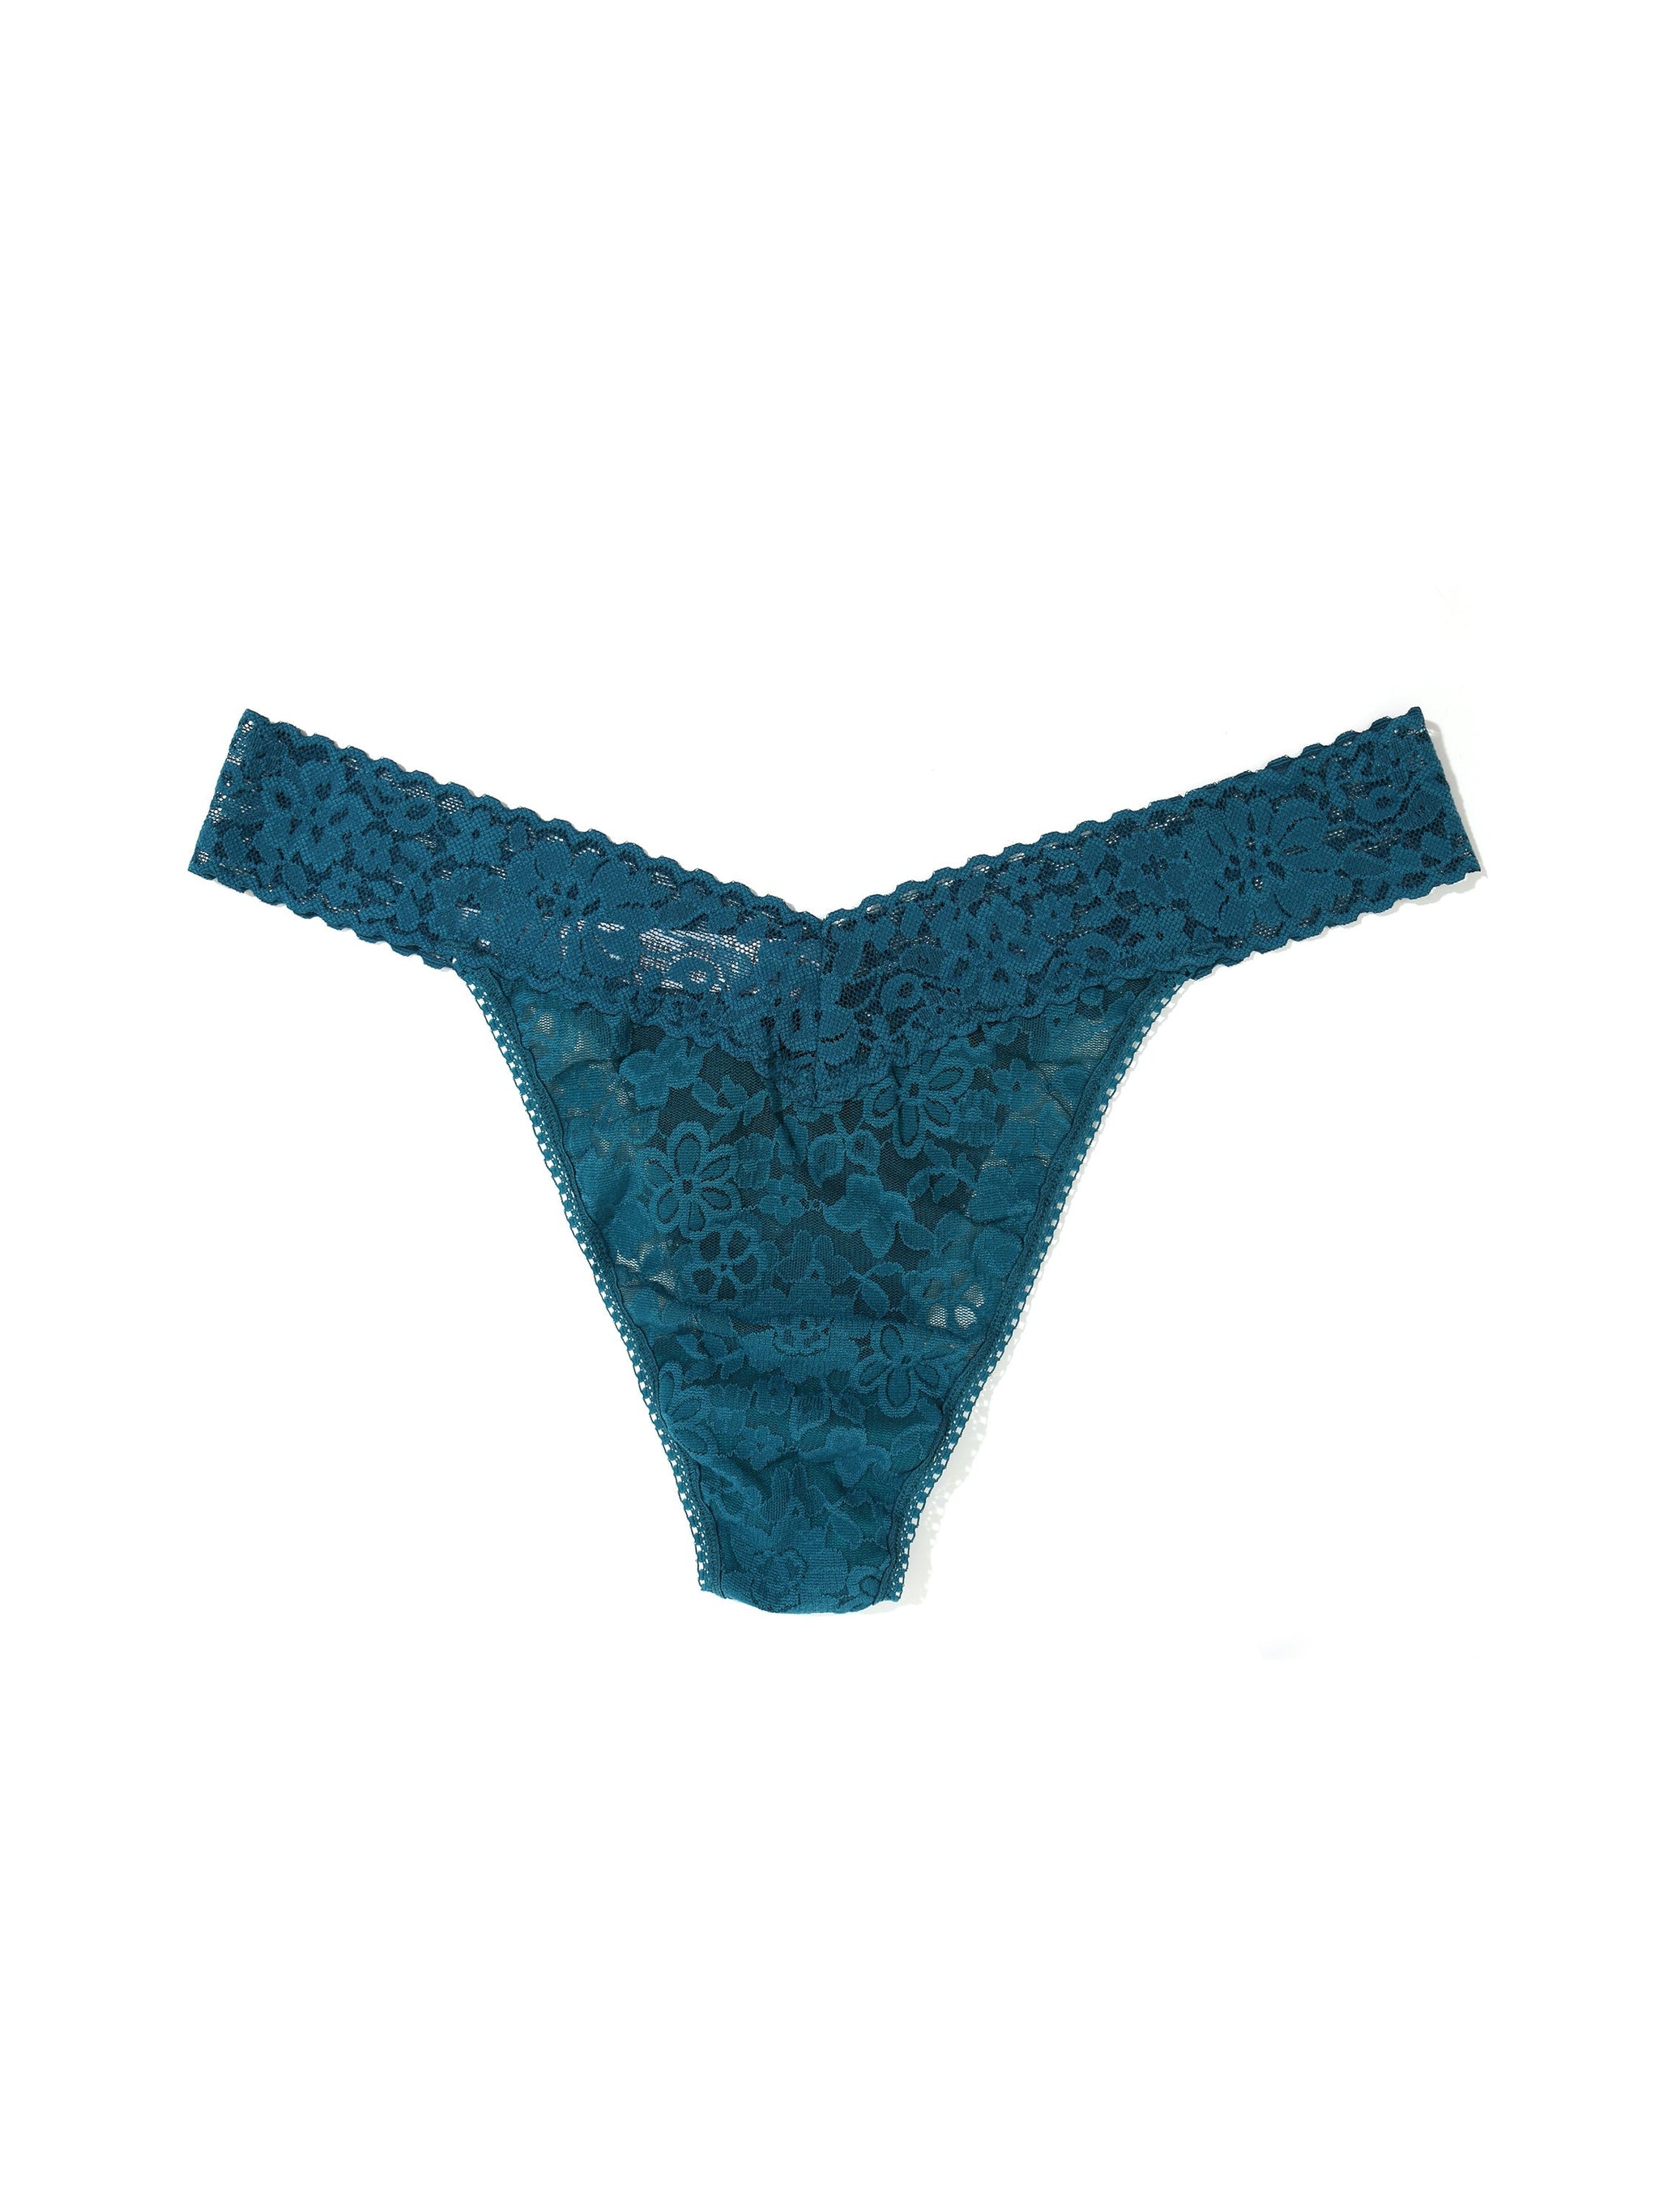 Plus Size Daily Lace™ Original Rise Thong Exclusive Earth Dance Green Sale